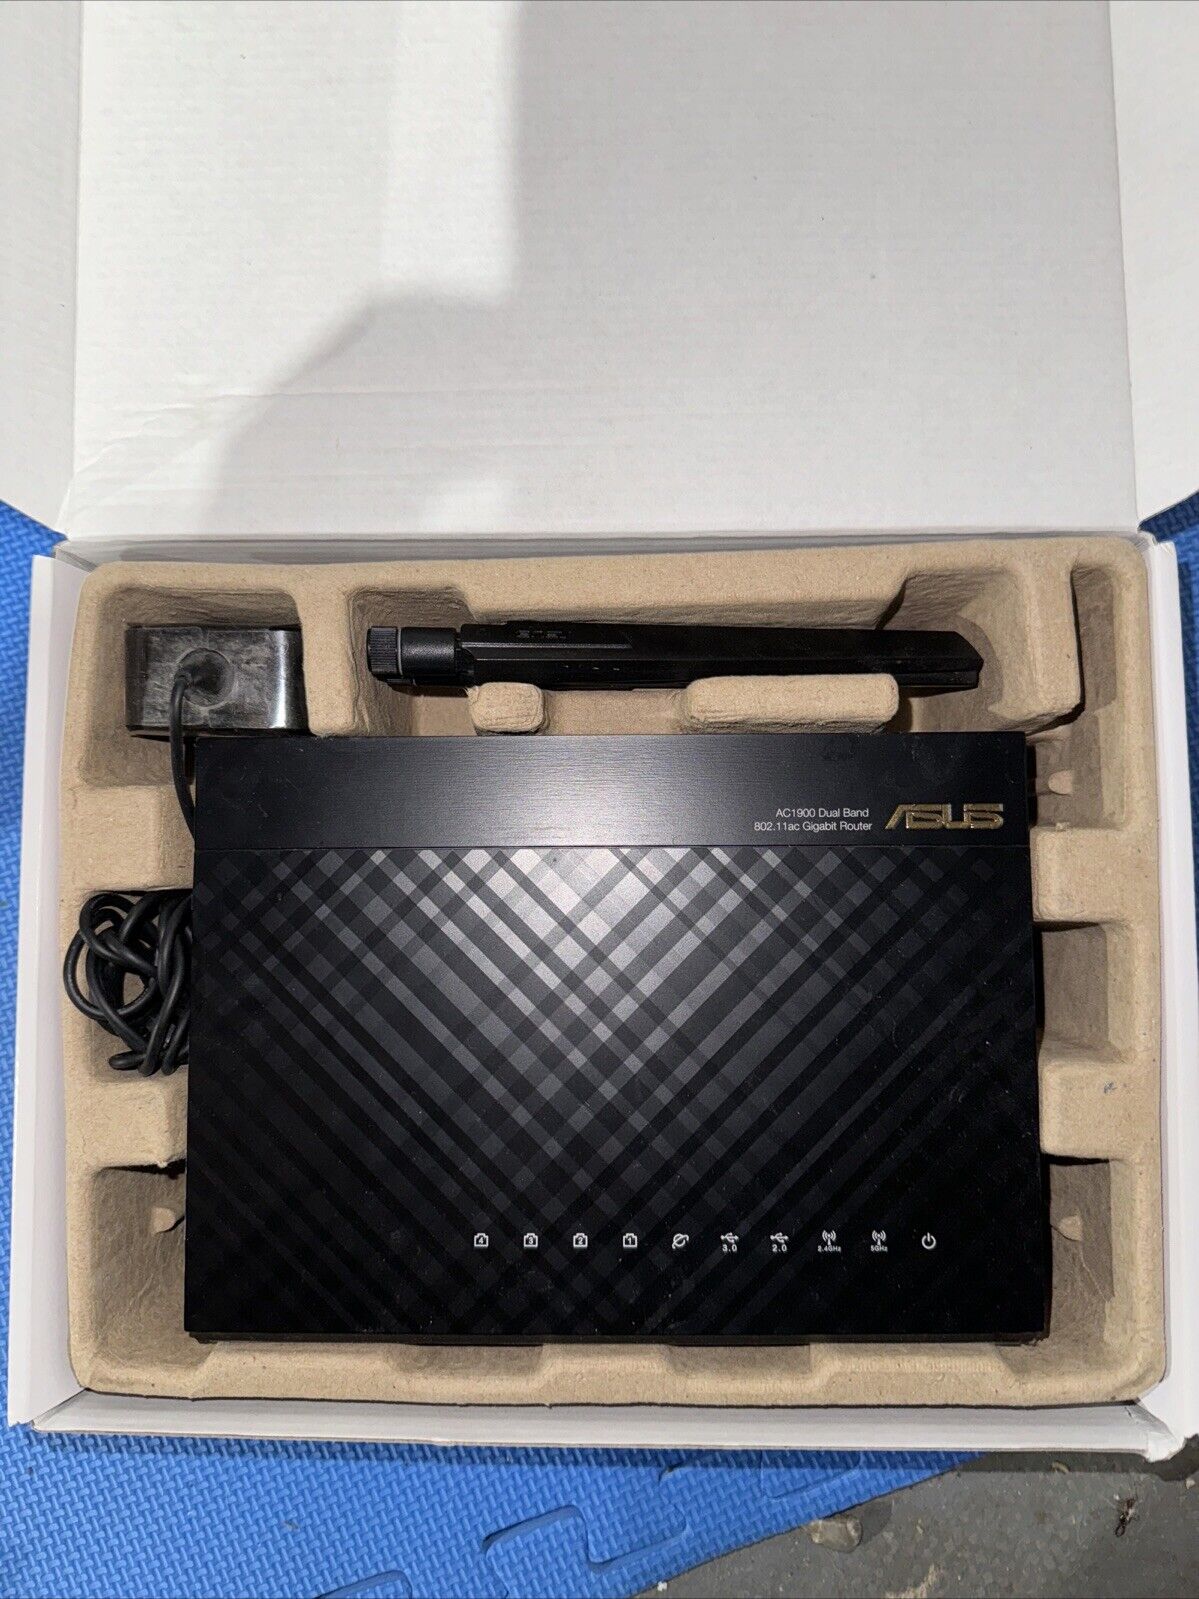 ASUS AC1900 Dual Band Wireless Internet Router - Black